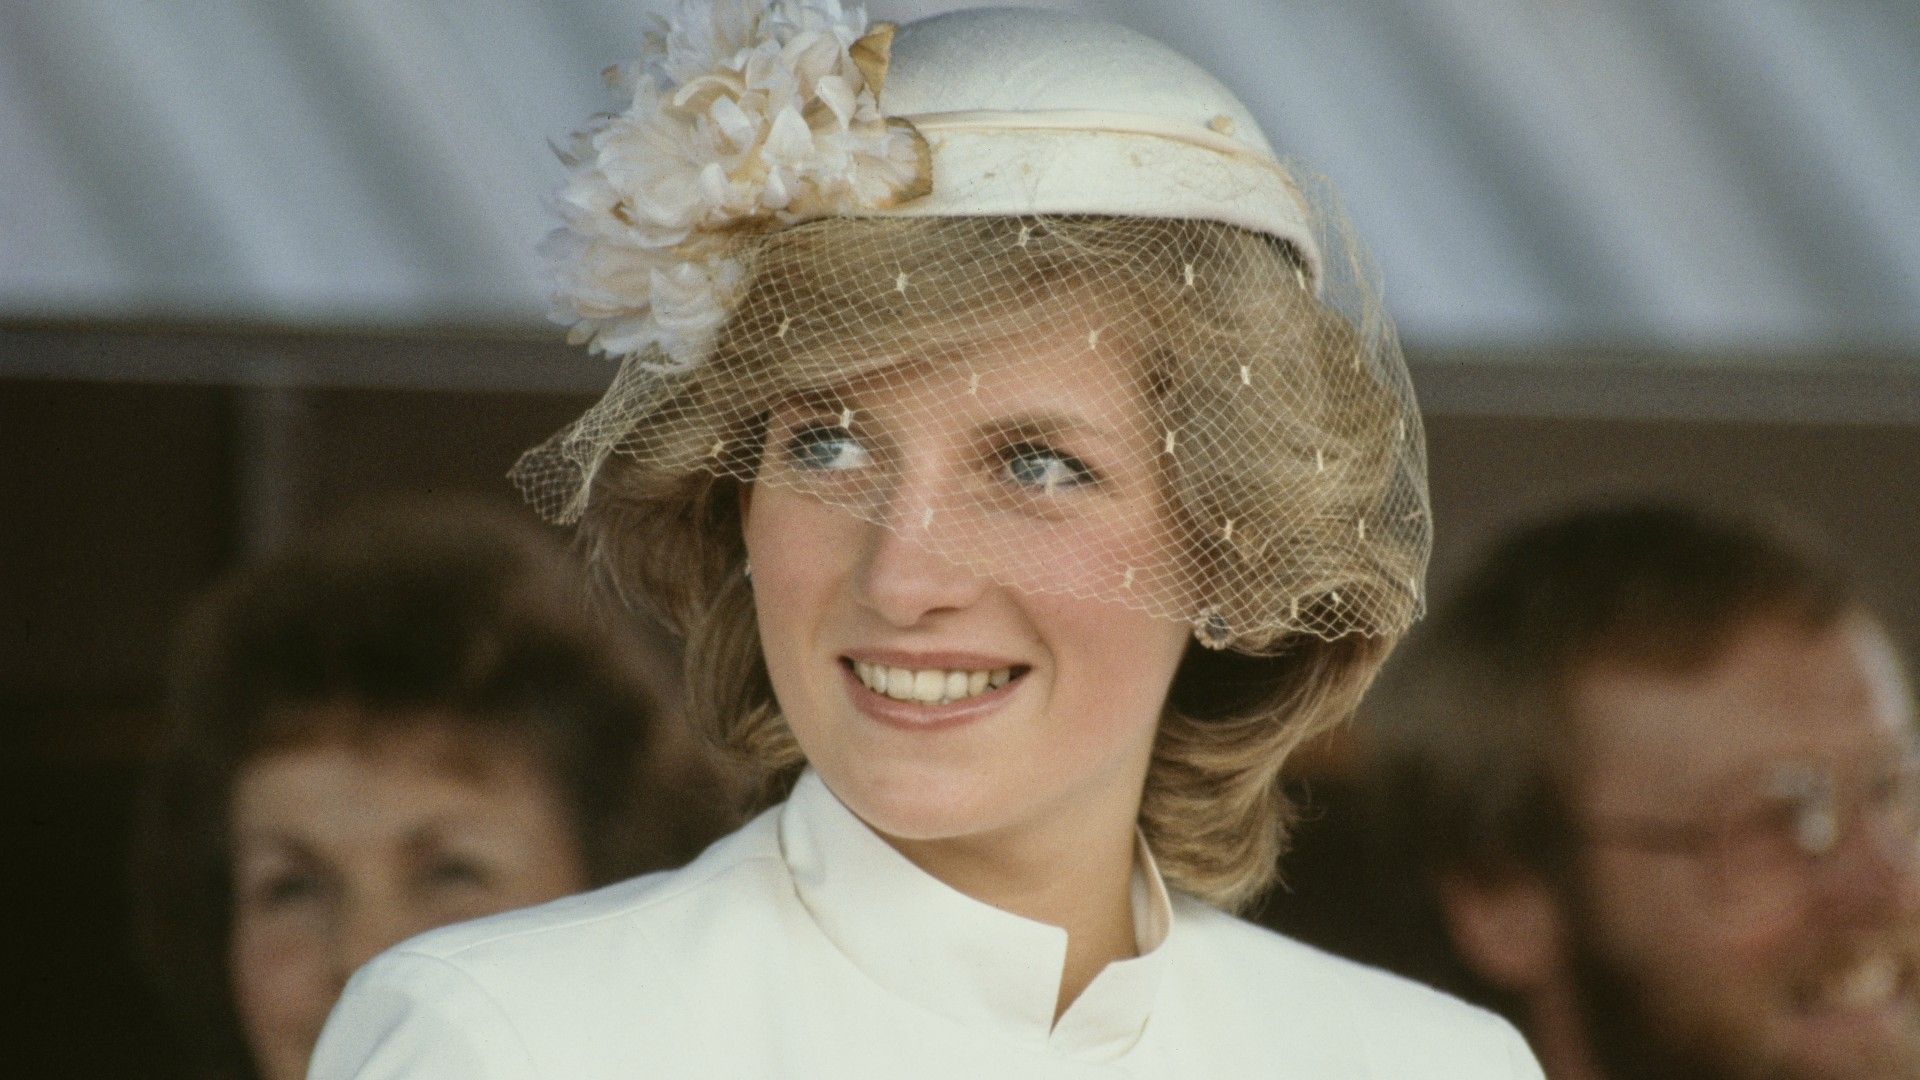 <p>                     Diana may have married into royalty, but she was already as close as it gets before meeting her future husband. Her family were (and are) British nobility, meaning that when she was born, she was styled as ‘The Honourable Diana Frances Spencer’.                   </p>                                      <p>                     And when she was 14 years old, she also officially became Lady Diana. In 1975, her father John inherited his Earldom, becoming the Viscount of Althorp when Diana’s grandfather Albert Spencer passed away. So even if Diana had never married Charles and become a member of the royal family, she would still have been referred to as Lady Diana.                   </p>